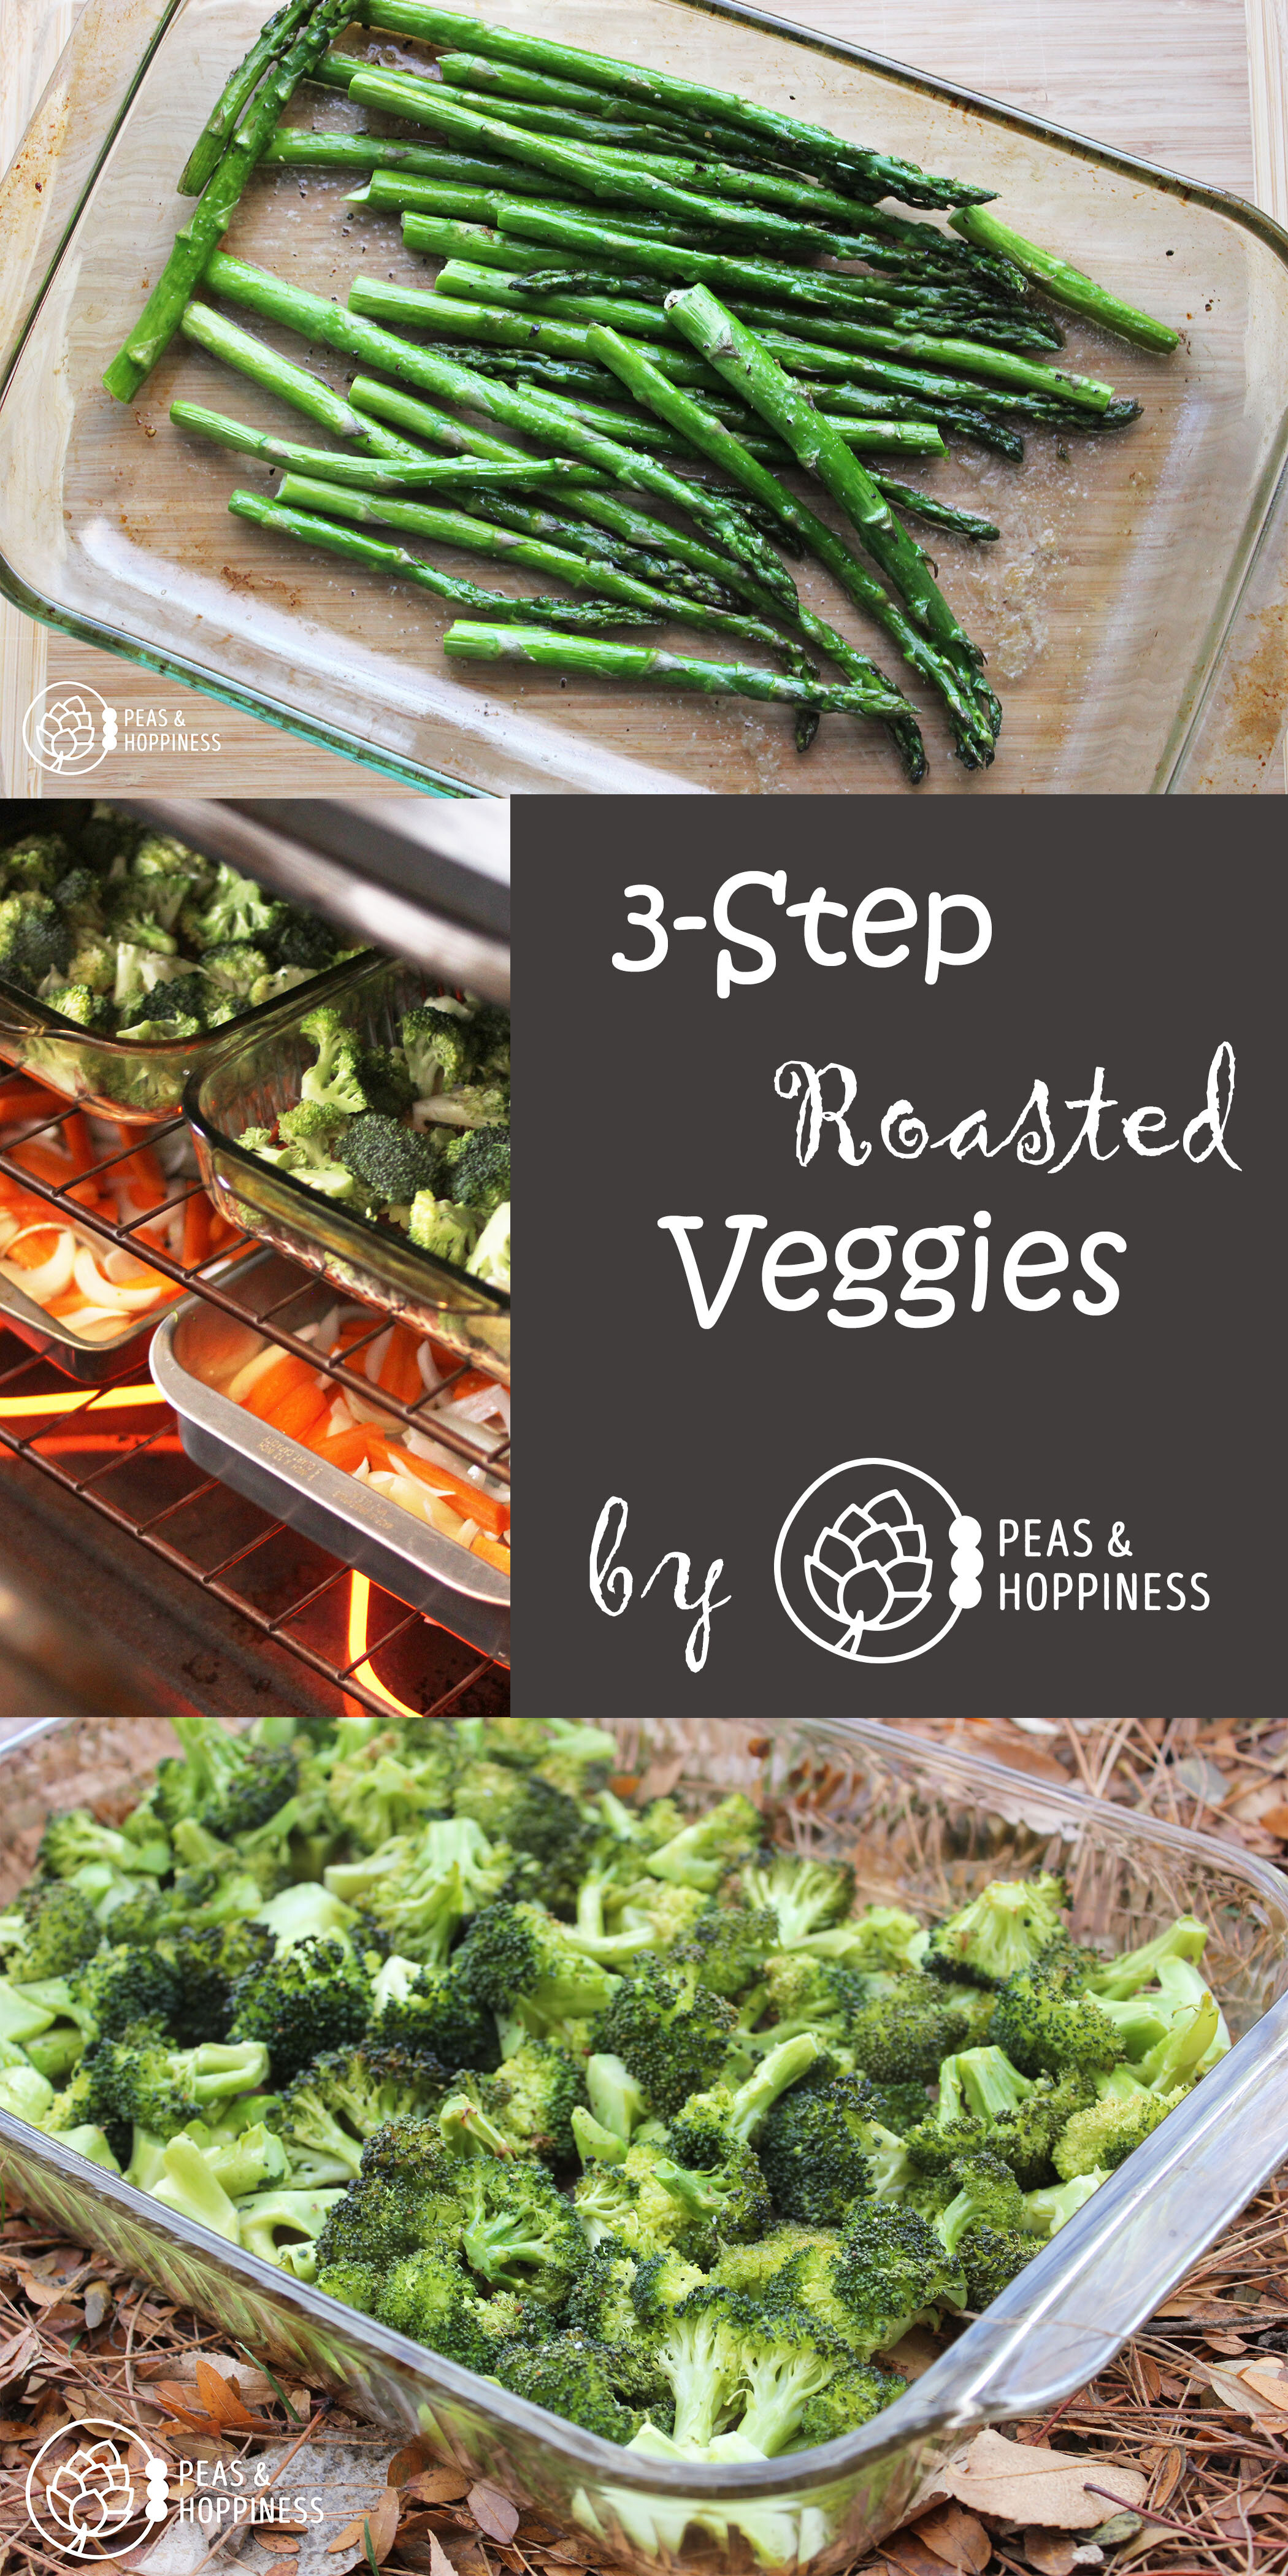 3 Step Roasted Veggies from Peas and Hoppiness - www.peasandhoppiness.com